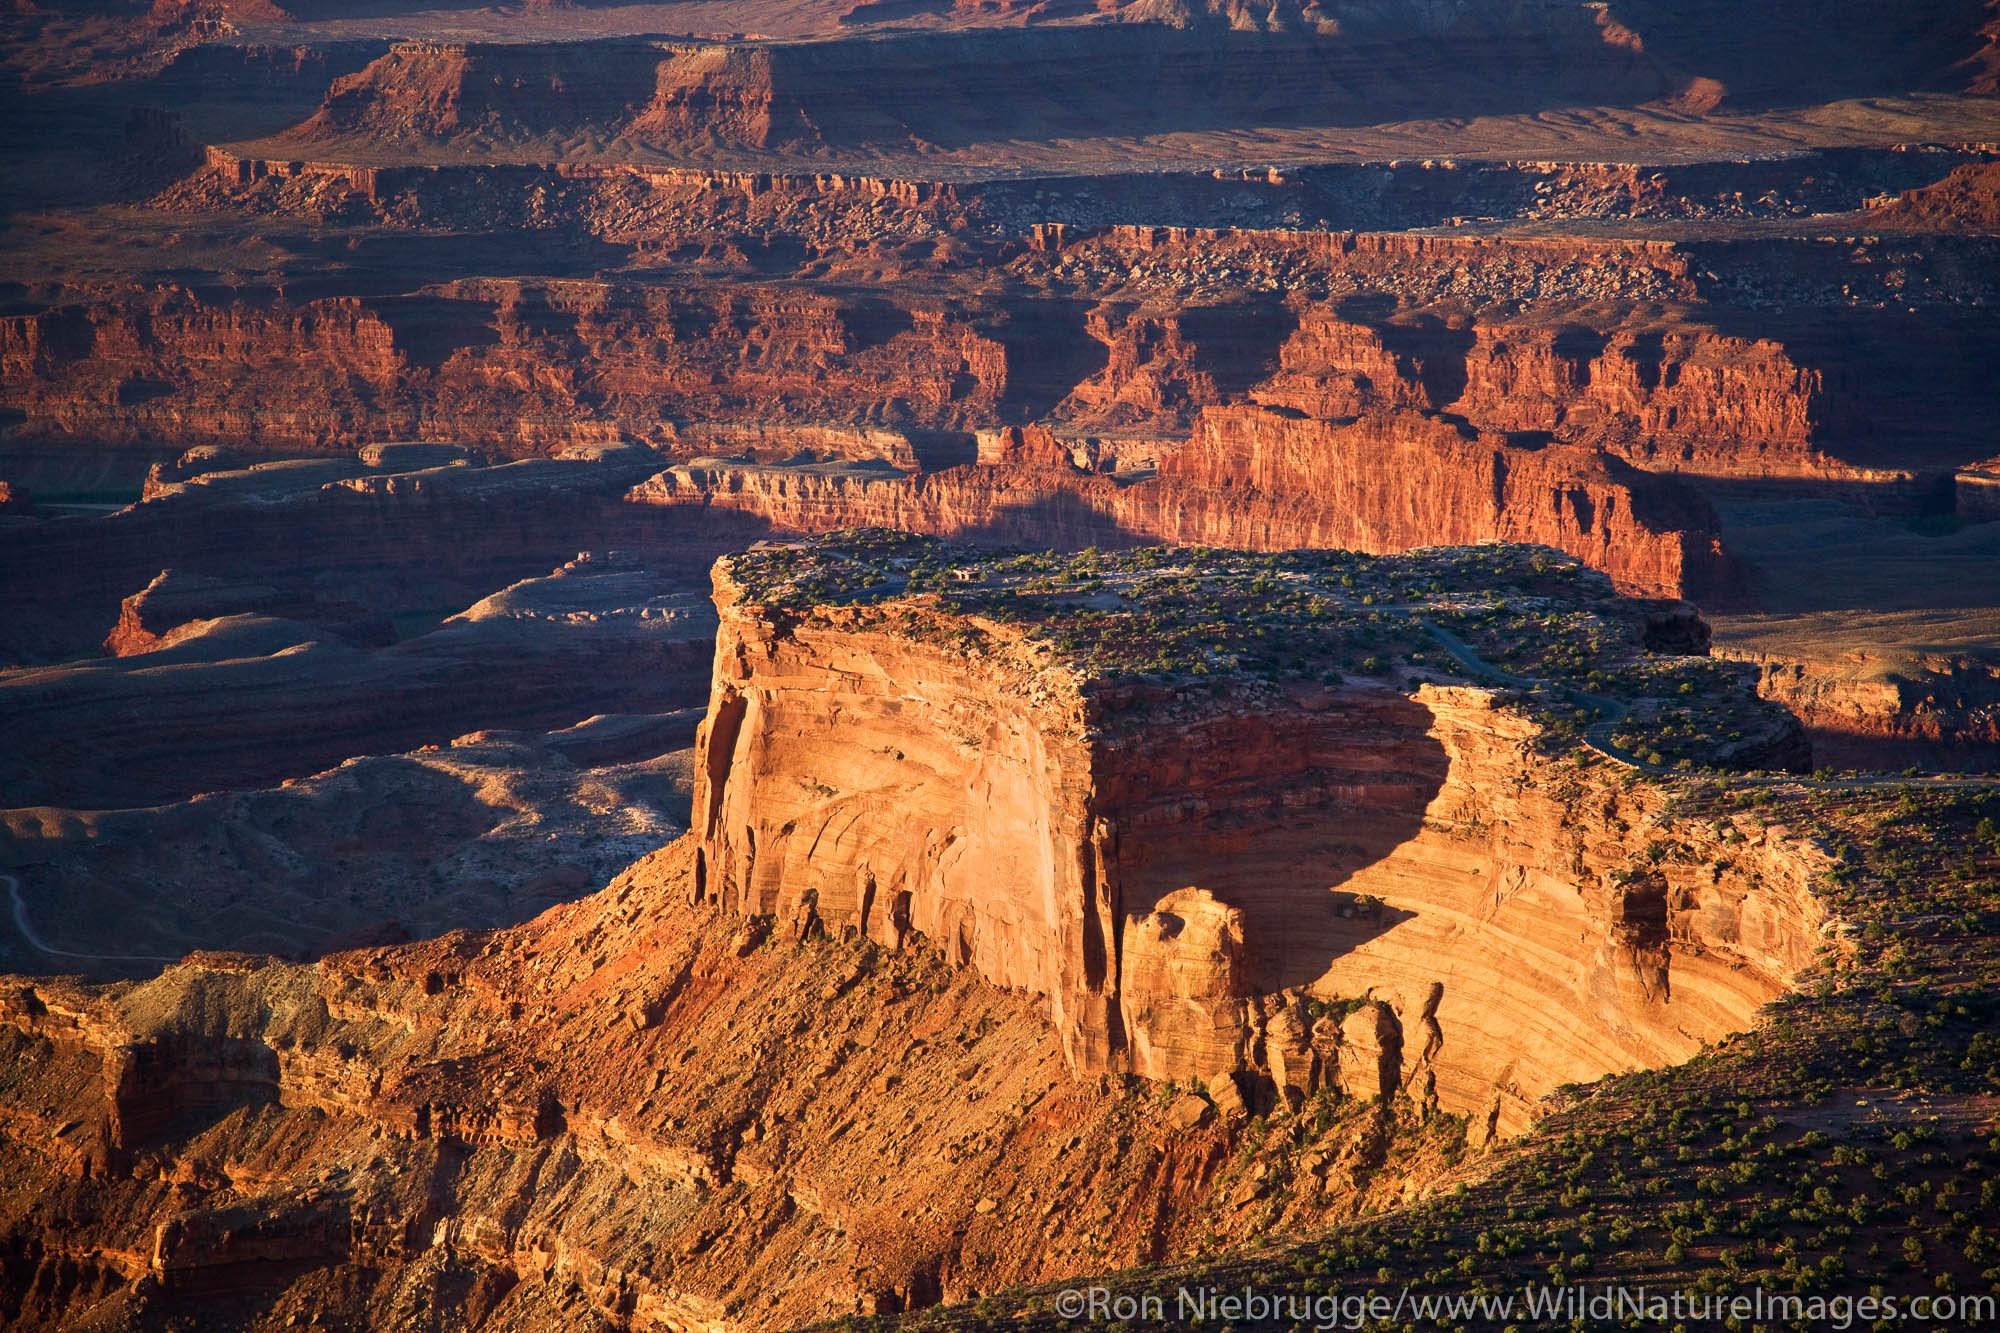 Dead Horse Point State Park and Island in the Sky District, Canyonlands National Park, near Moab, Utah.